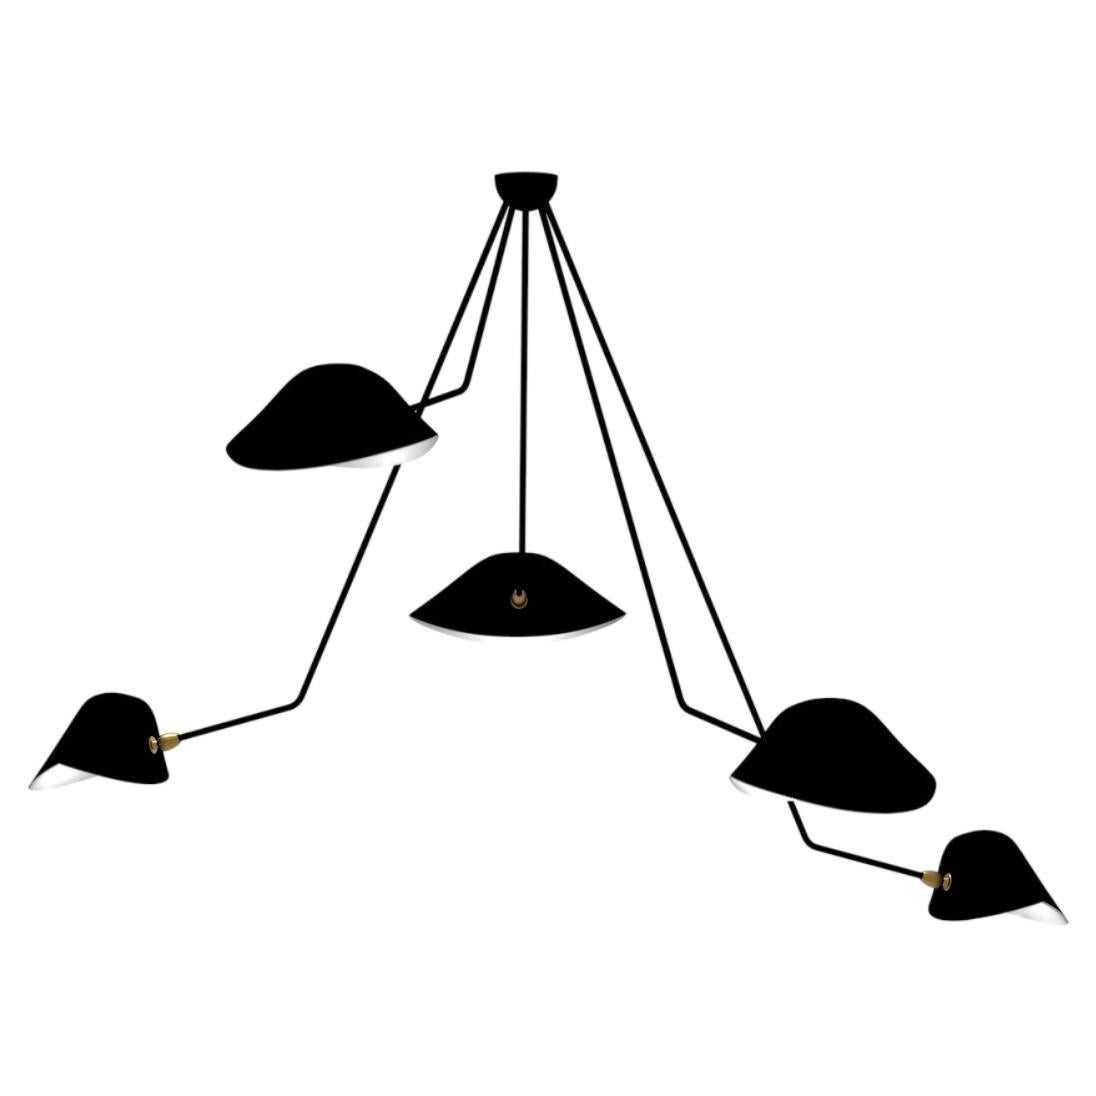 Serge Mouille - Spider Ceiling Lamp 5 Falling Arms in Black 47" Drop - IN STOCK! For Sale